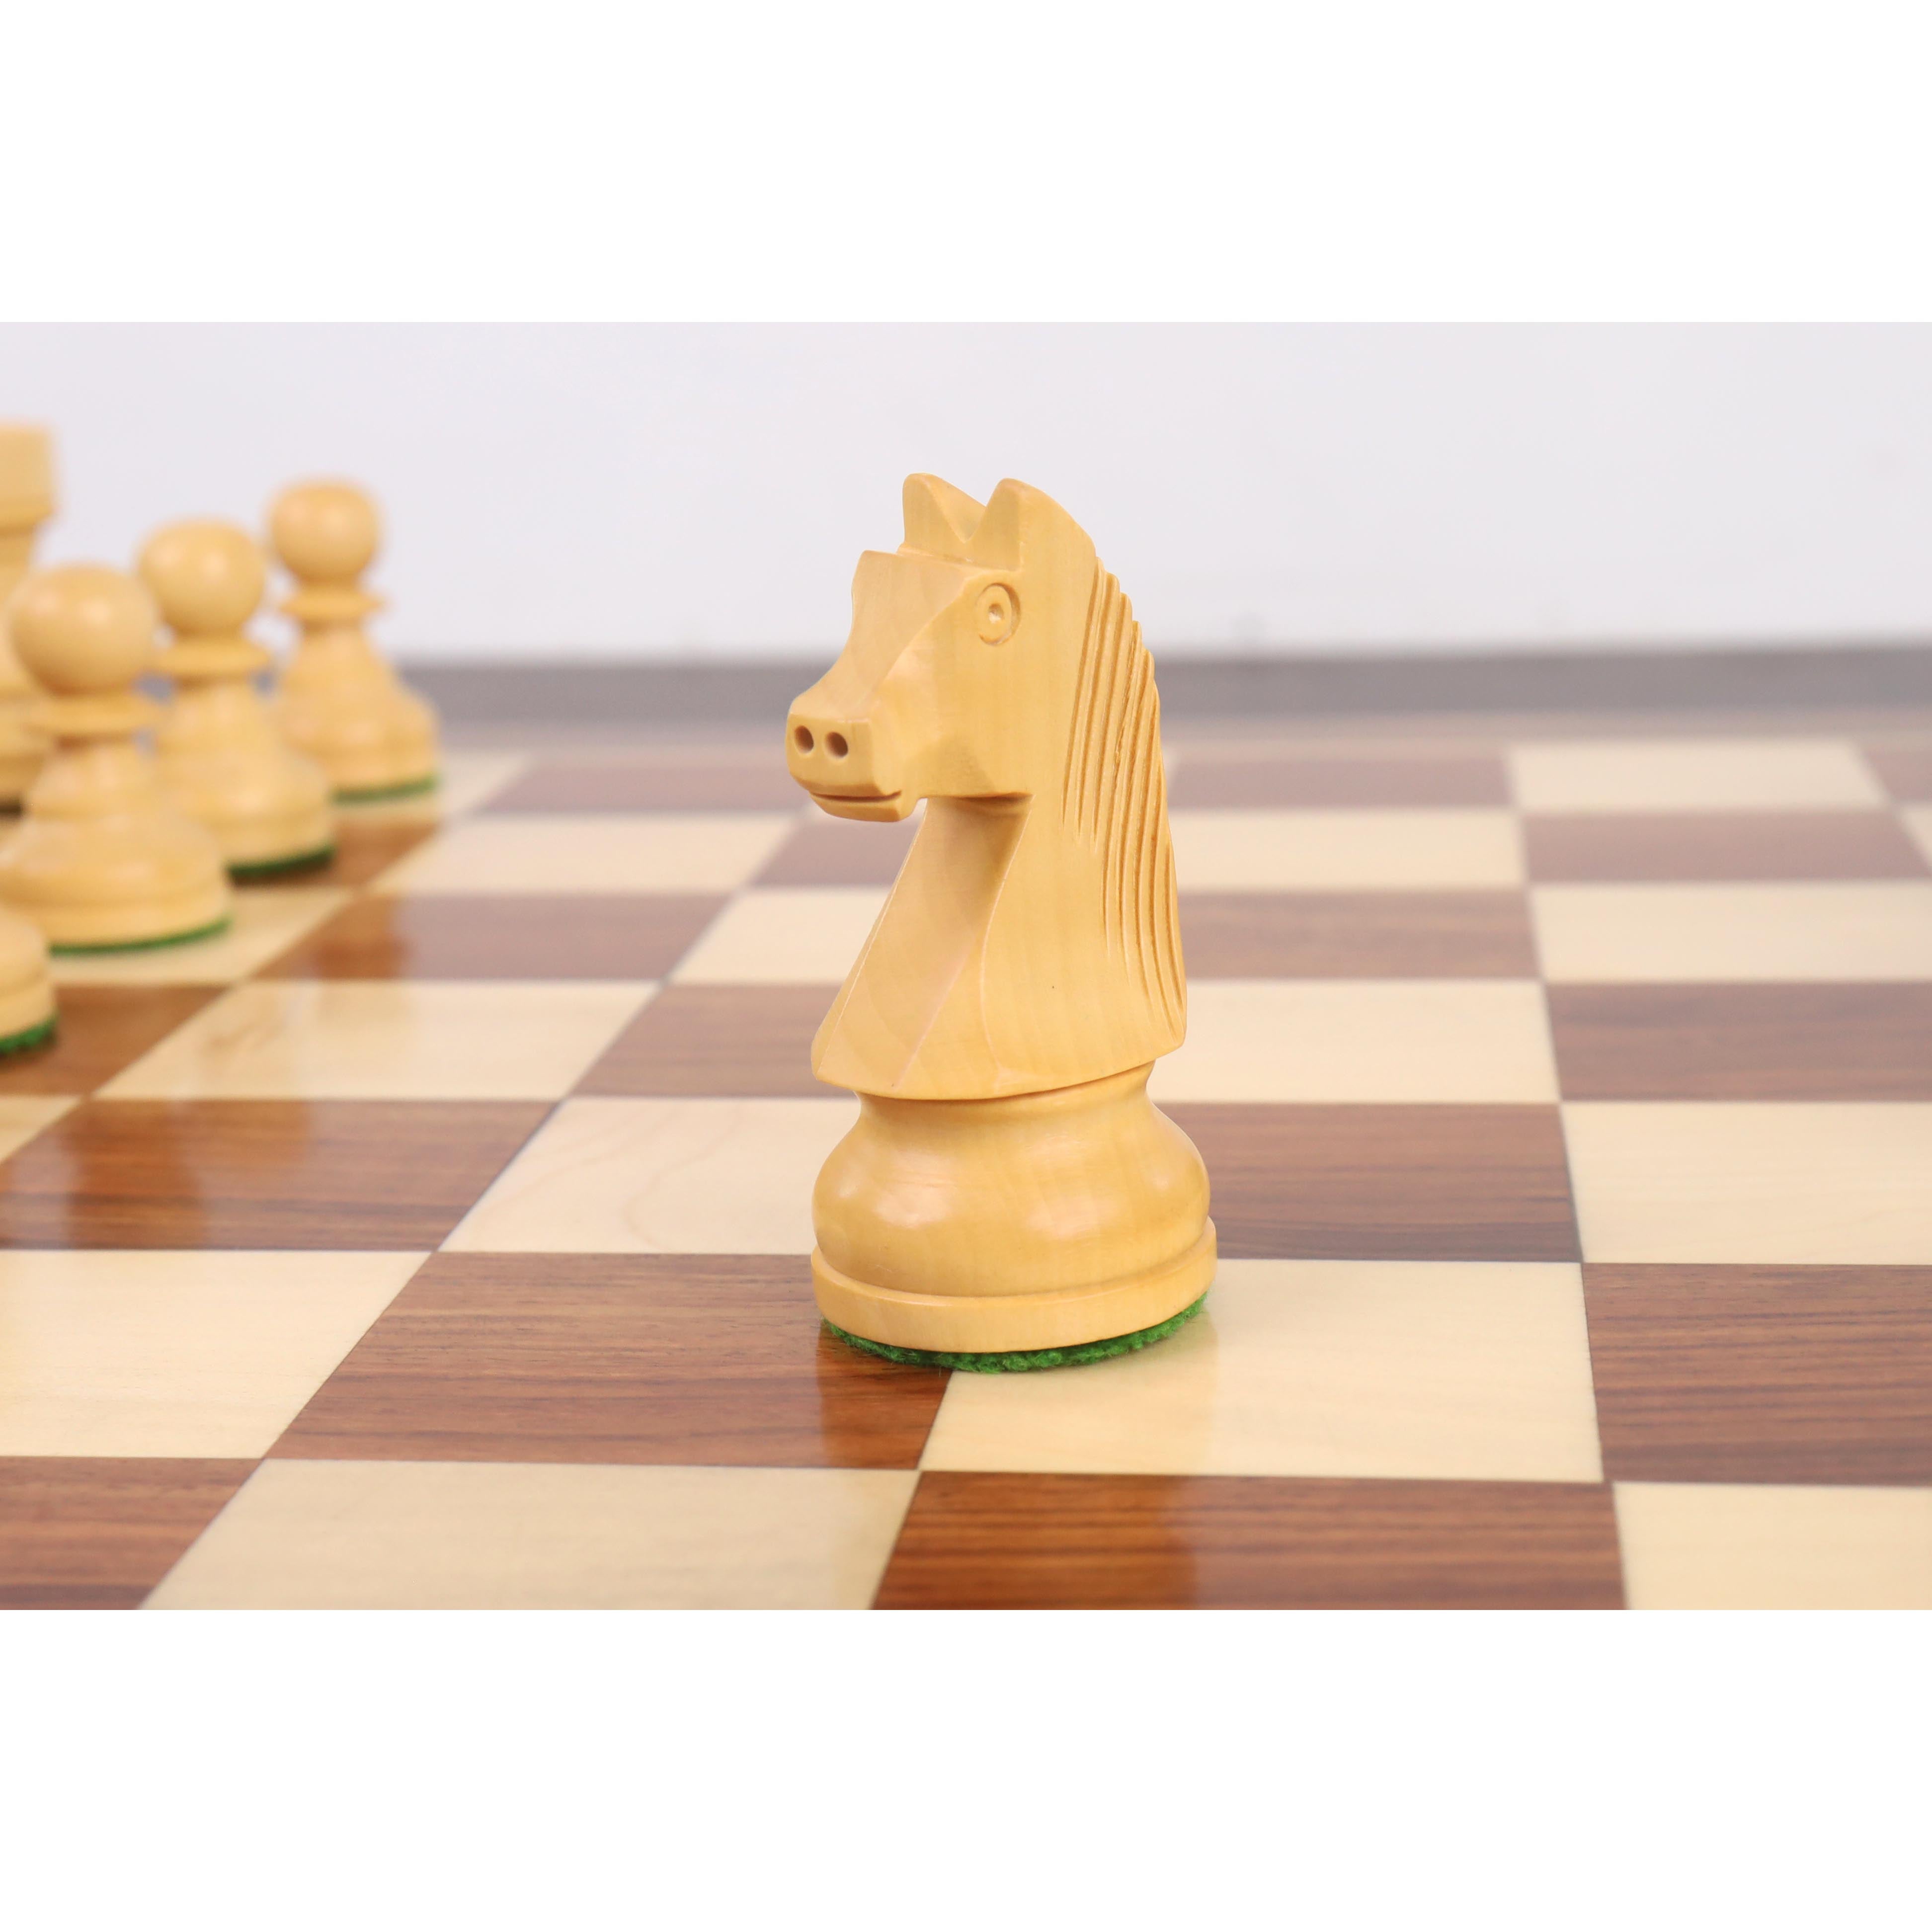 3.3" Tournament Staunton Chess Set- Chess Pieces Only - Golden Rosewood - Compact size